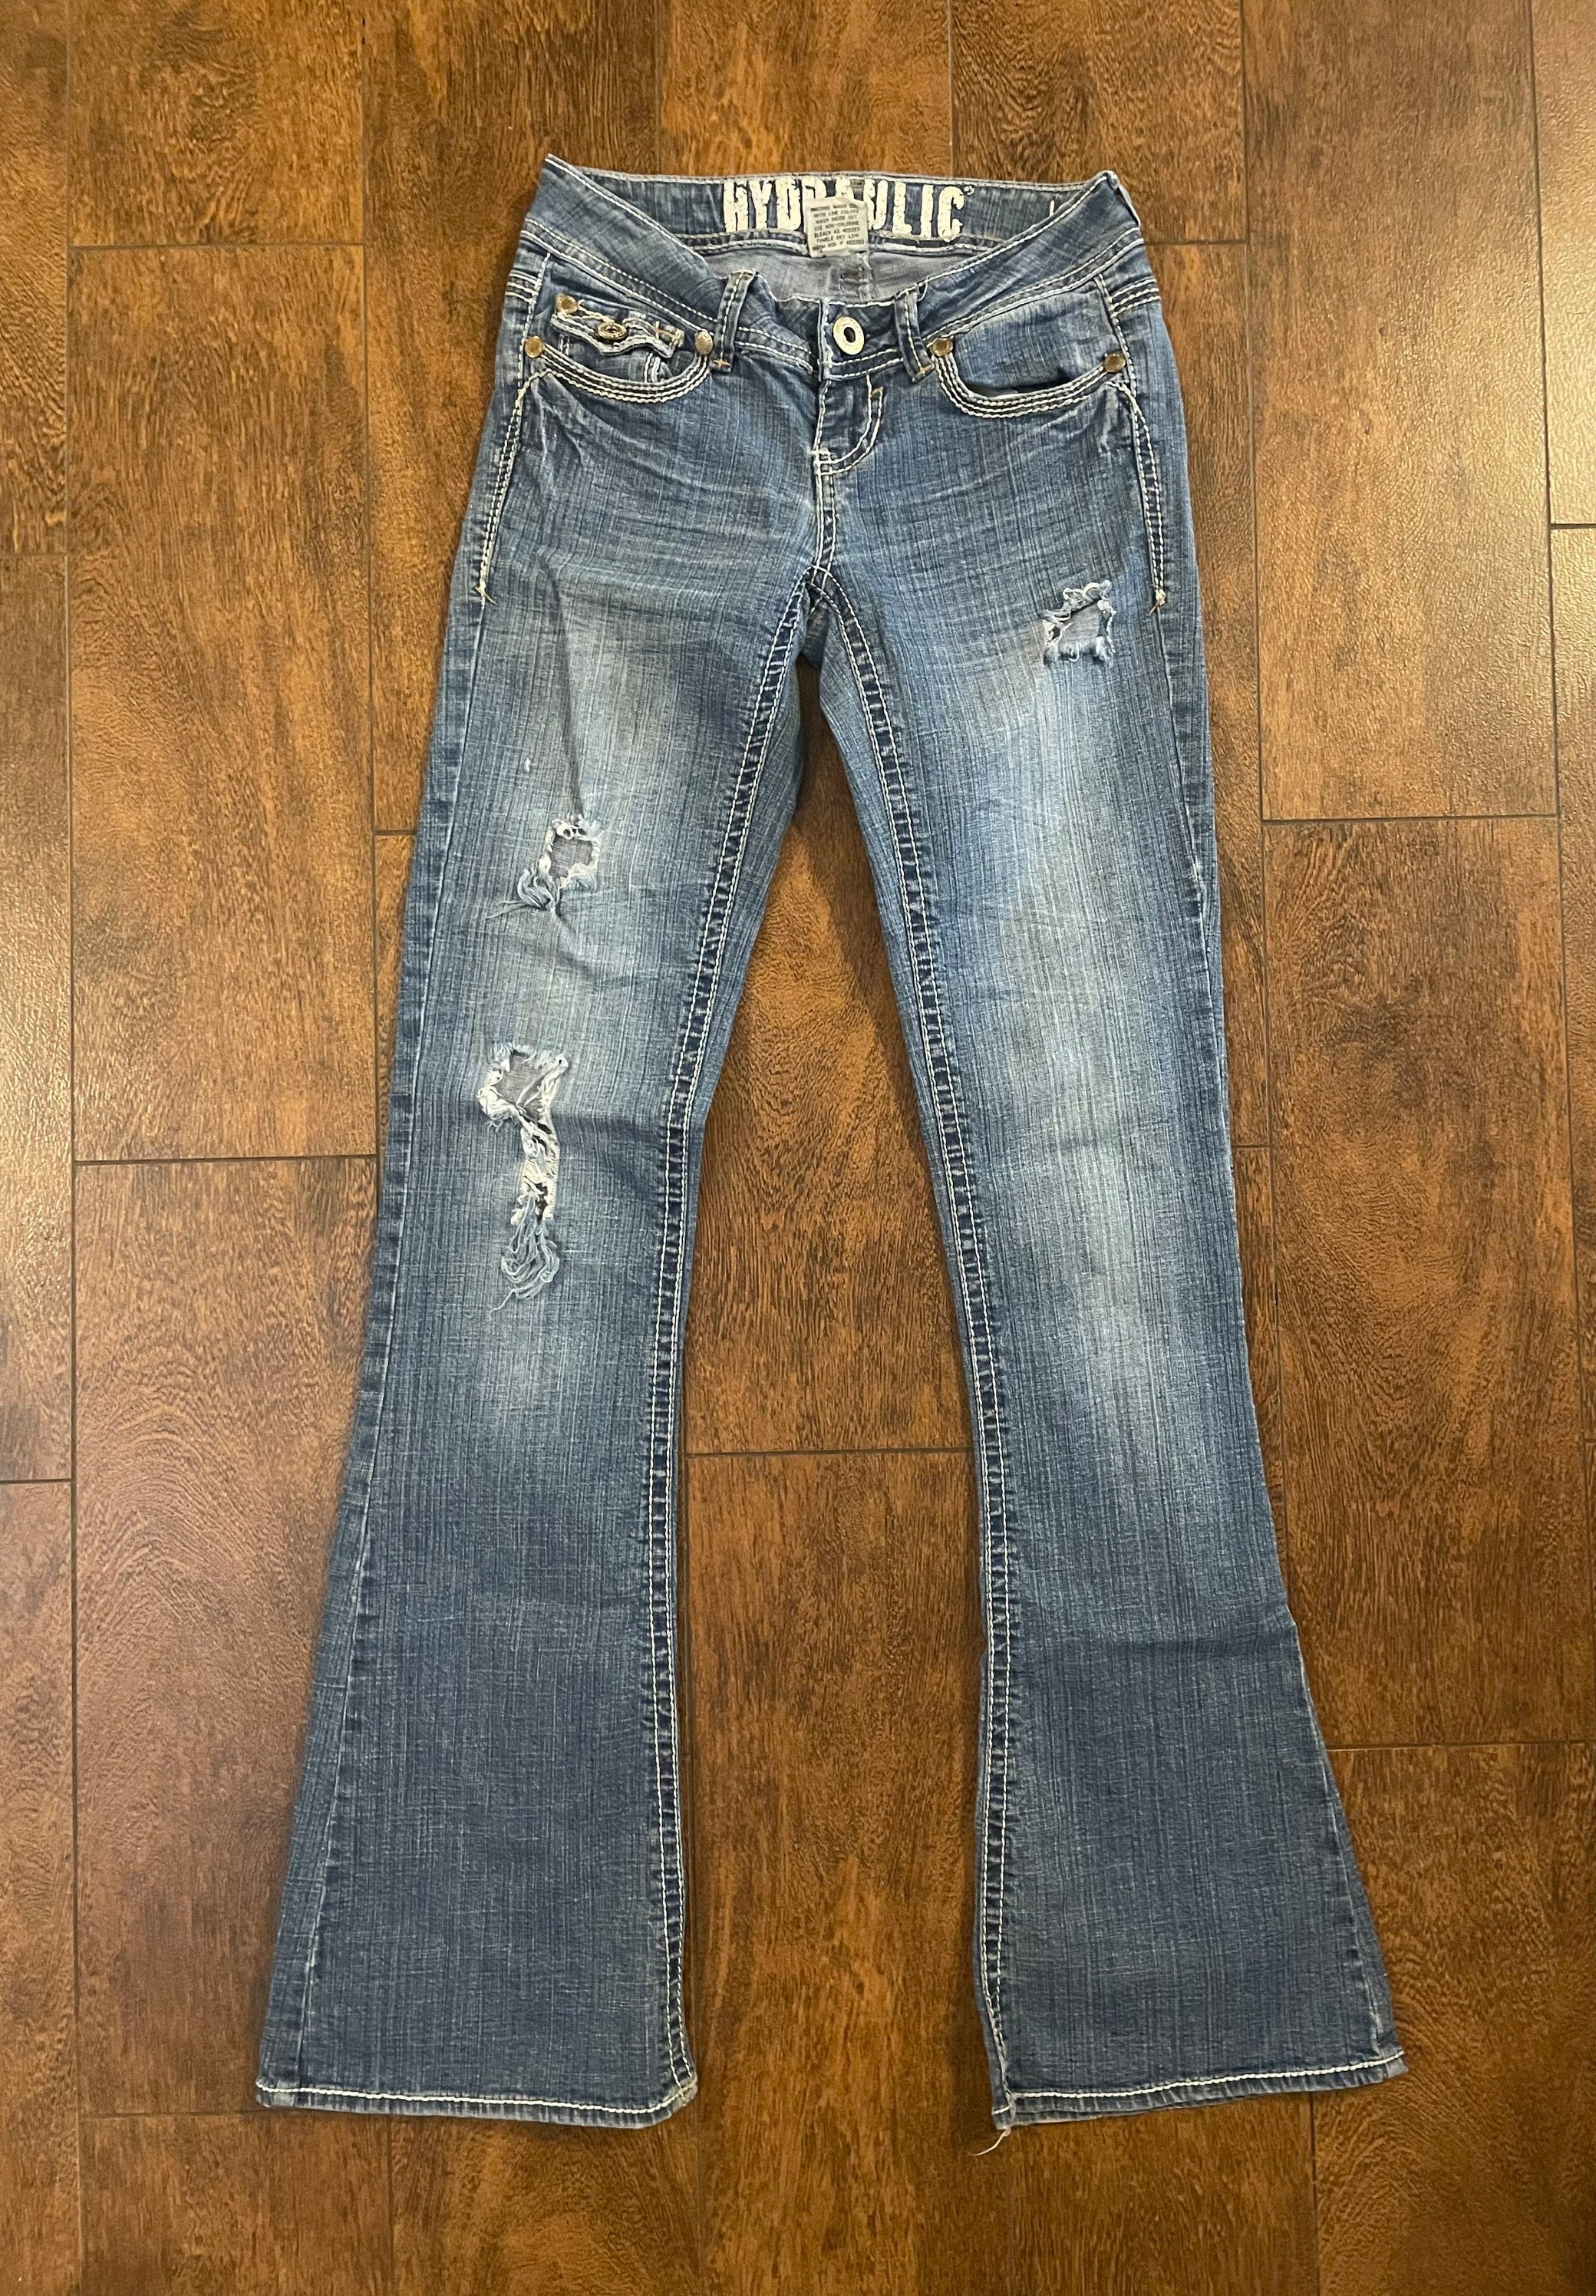 What Happened To Hydraulic Jeans?